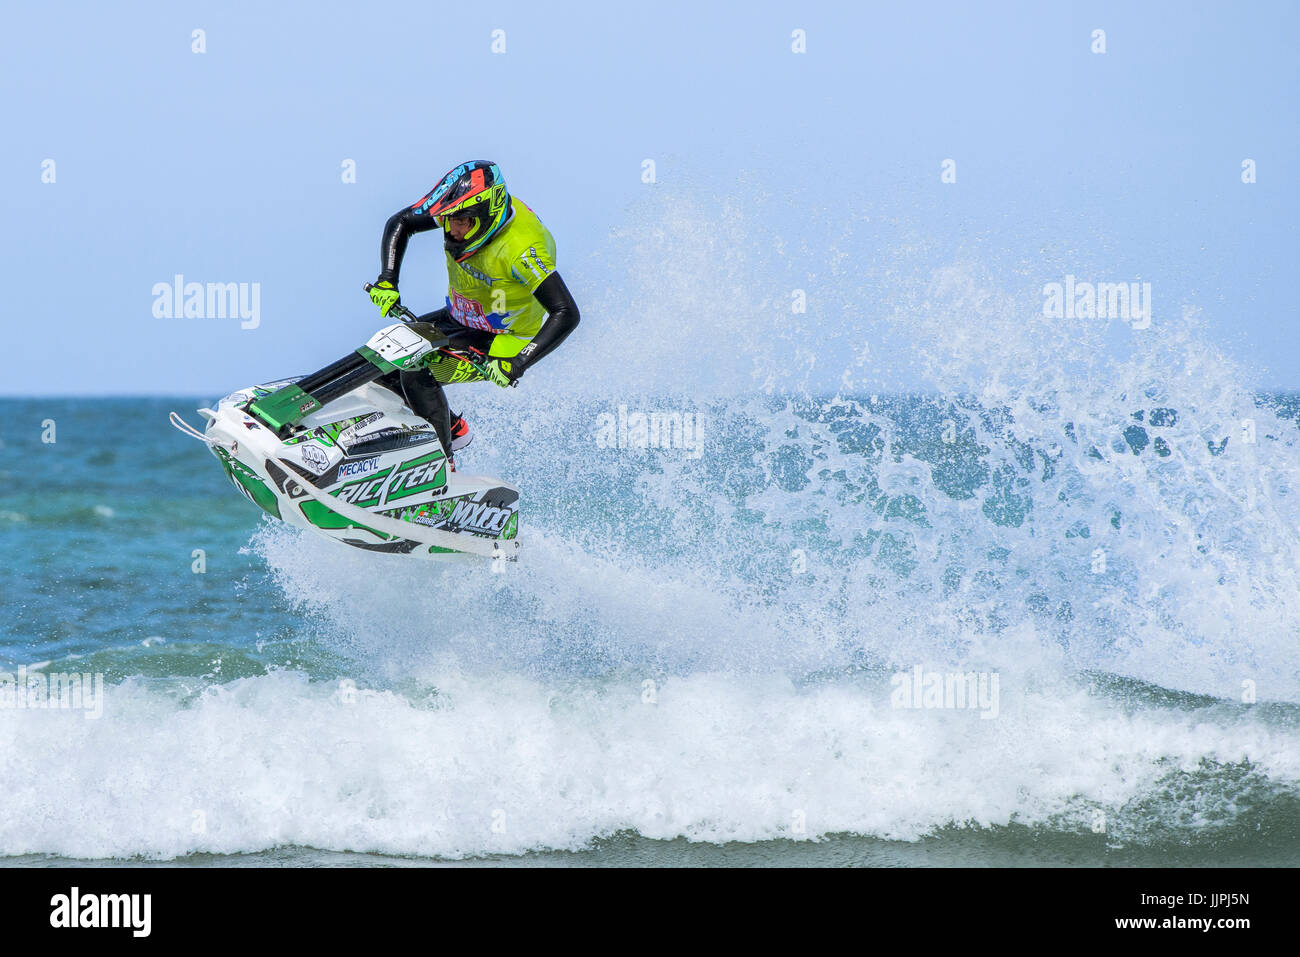 A jetskier competes in the IFWA Championships at Fistral beach in Cornwall. Stock Photo